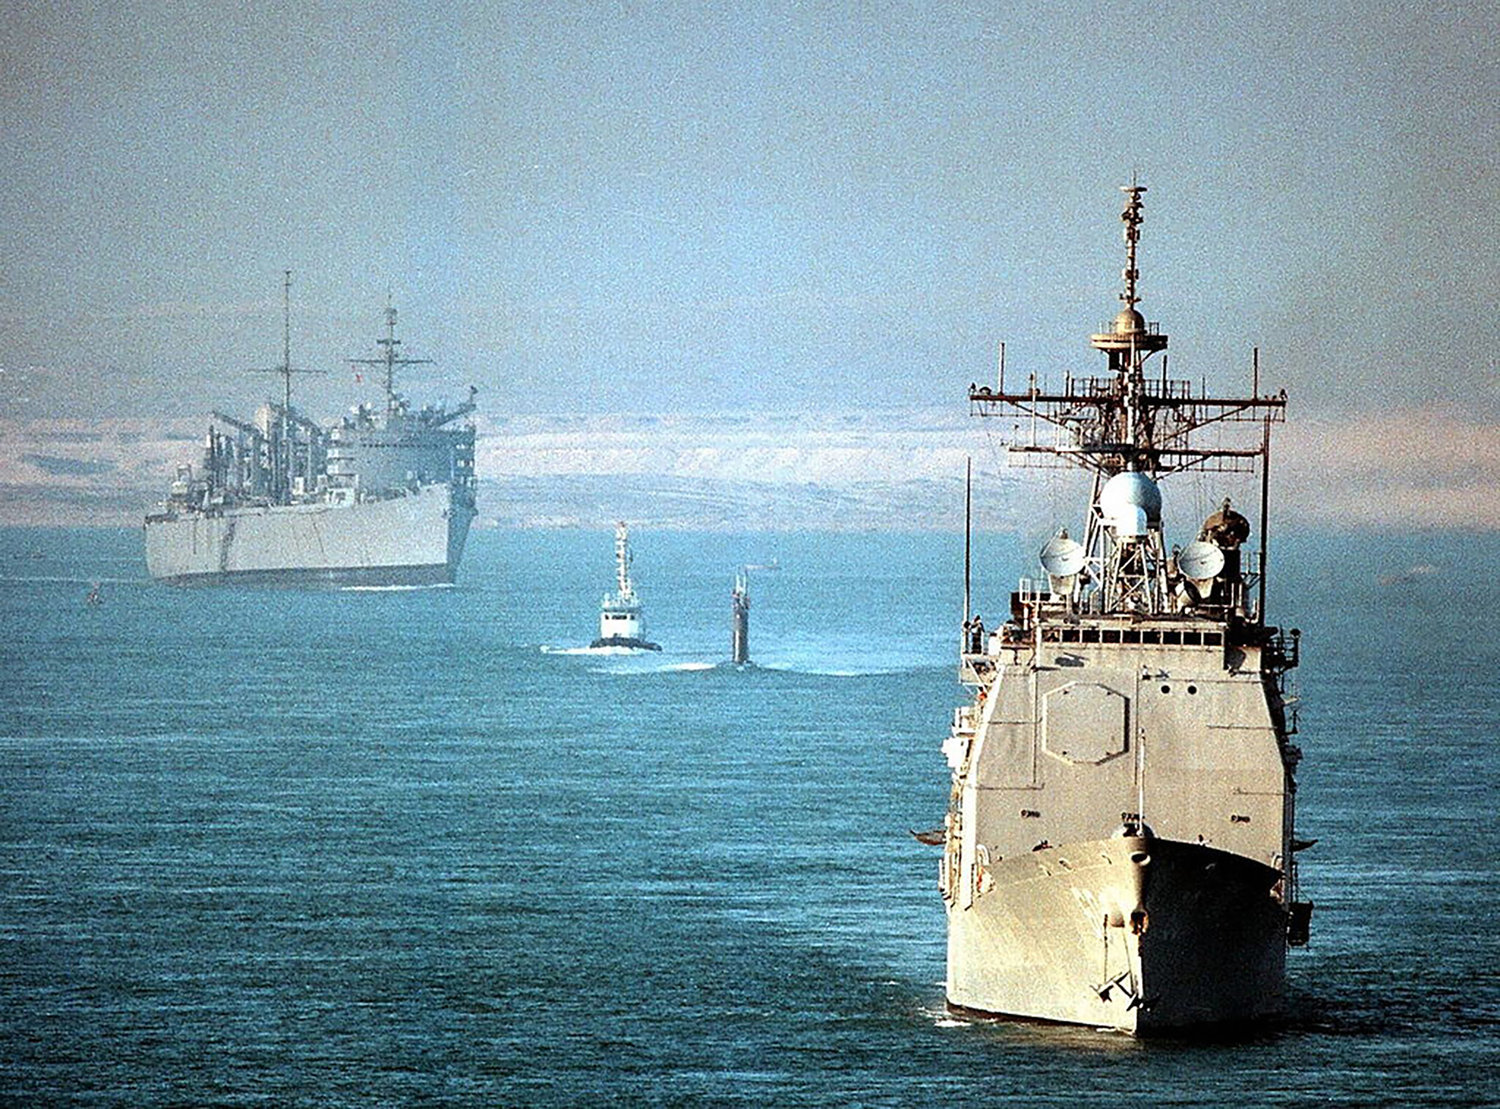 The USS Normandy, front, crosses the Suez Canal on Nov. 16, 1997. Simon McKeon, captain of the guided-missile cruiser, was relieved of his duties. (Jason Dent/AFP/Getty Images/TNS)